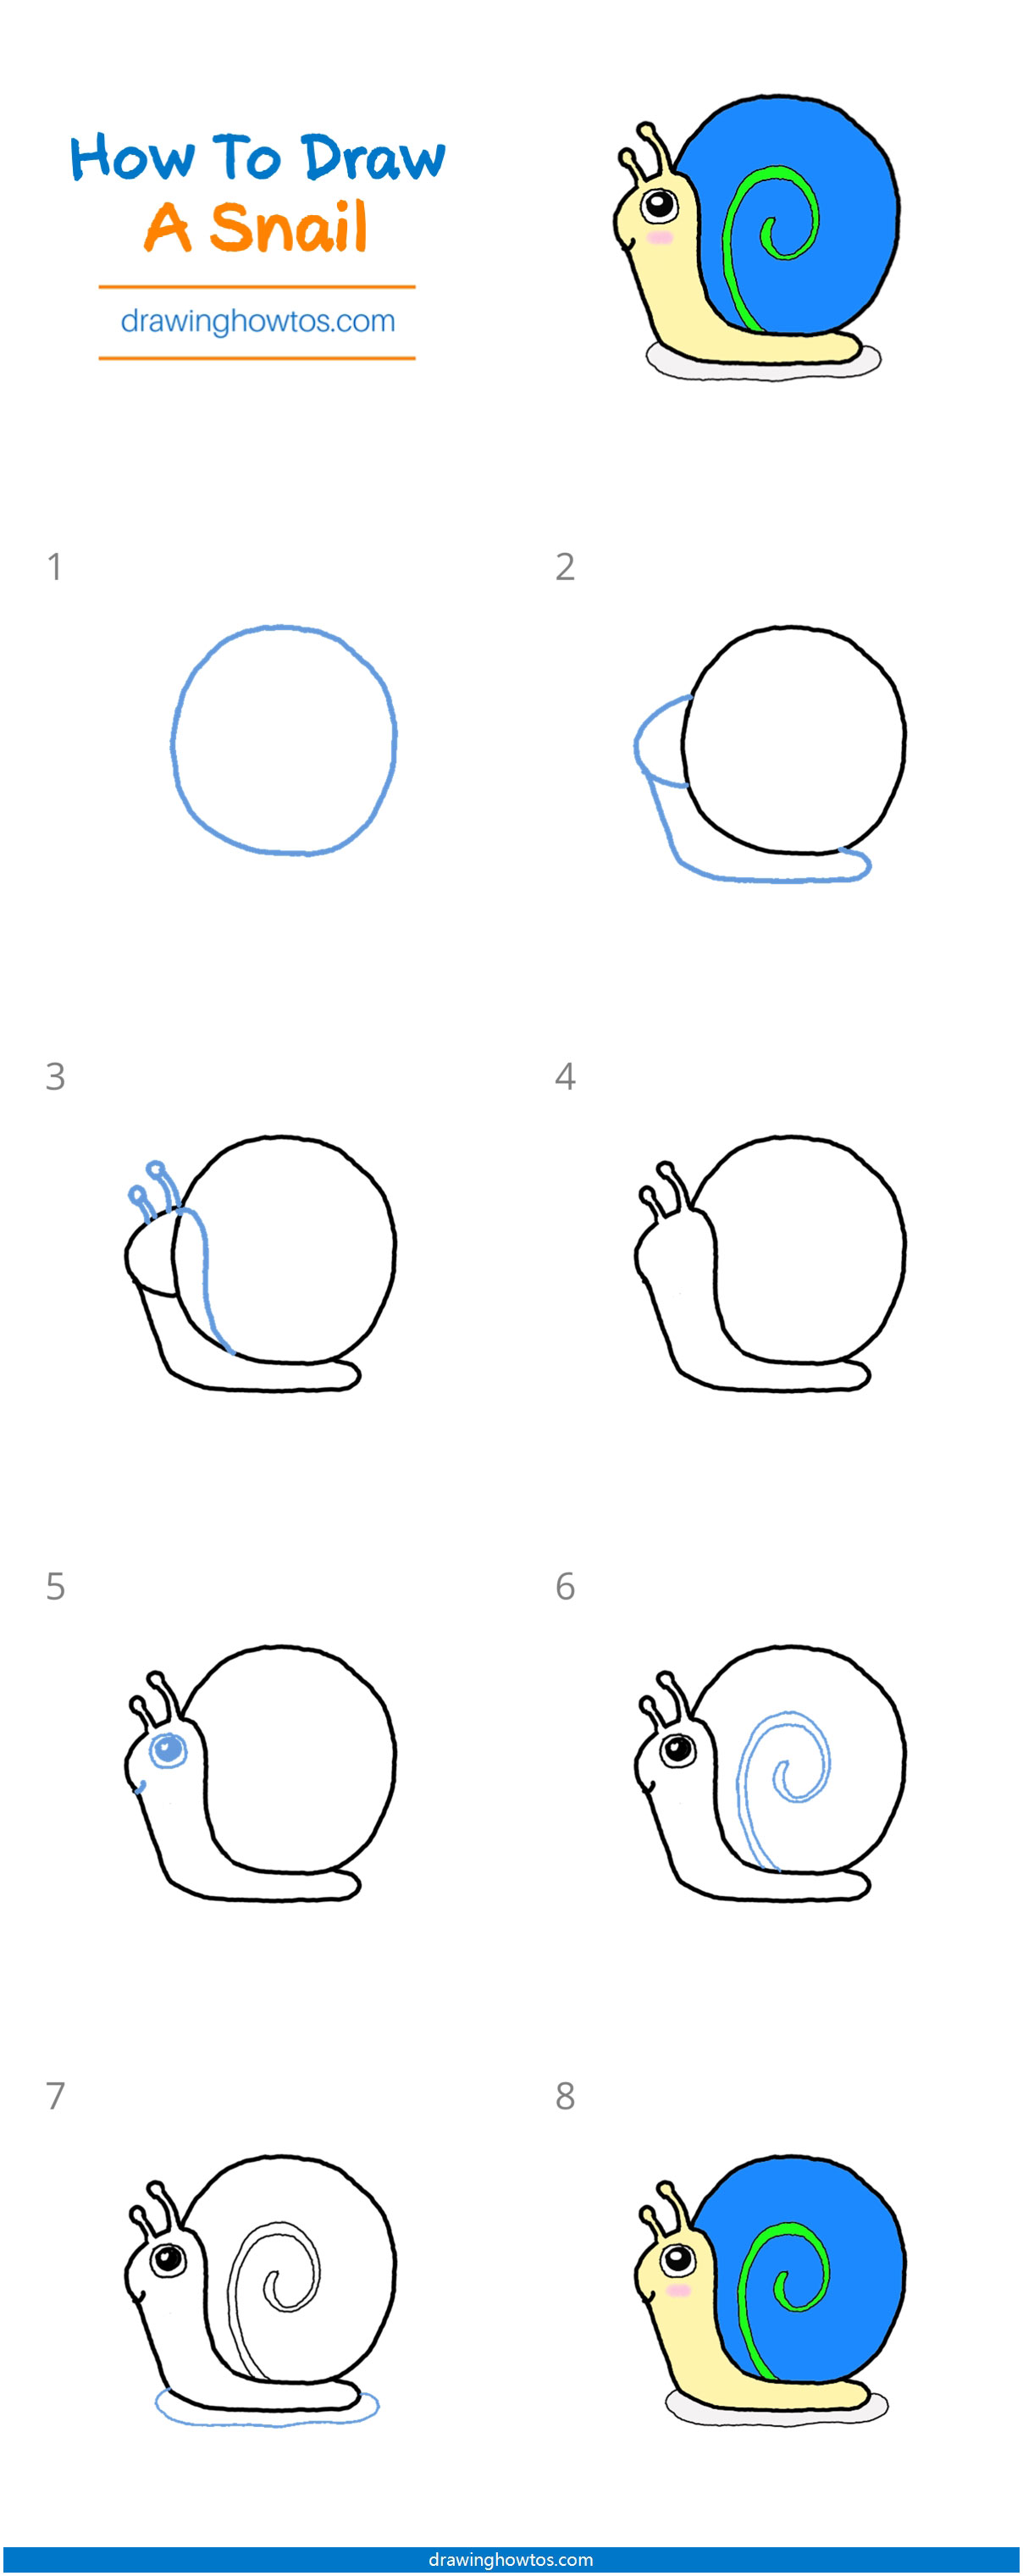 How to Draw a Snail - Step by Step Easy Drawing Guides - Drawing Howtos